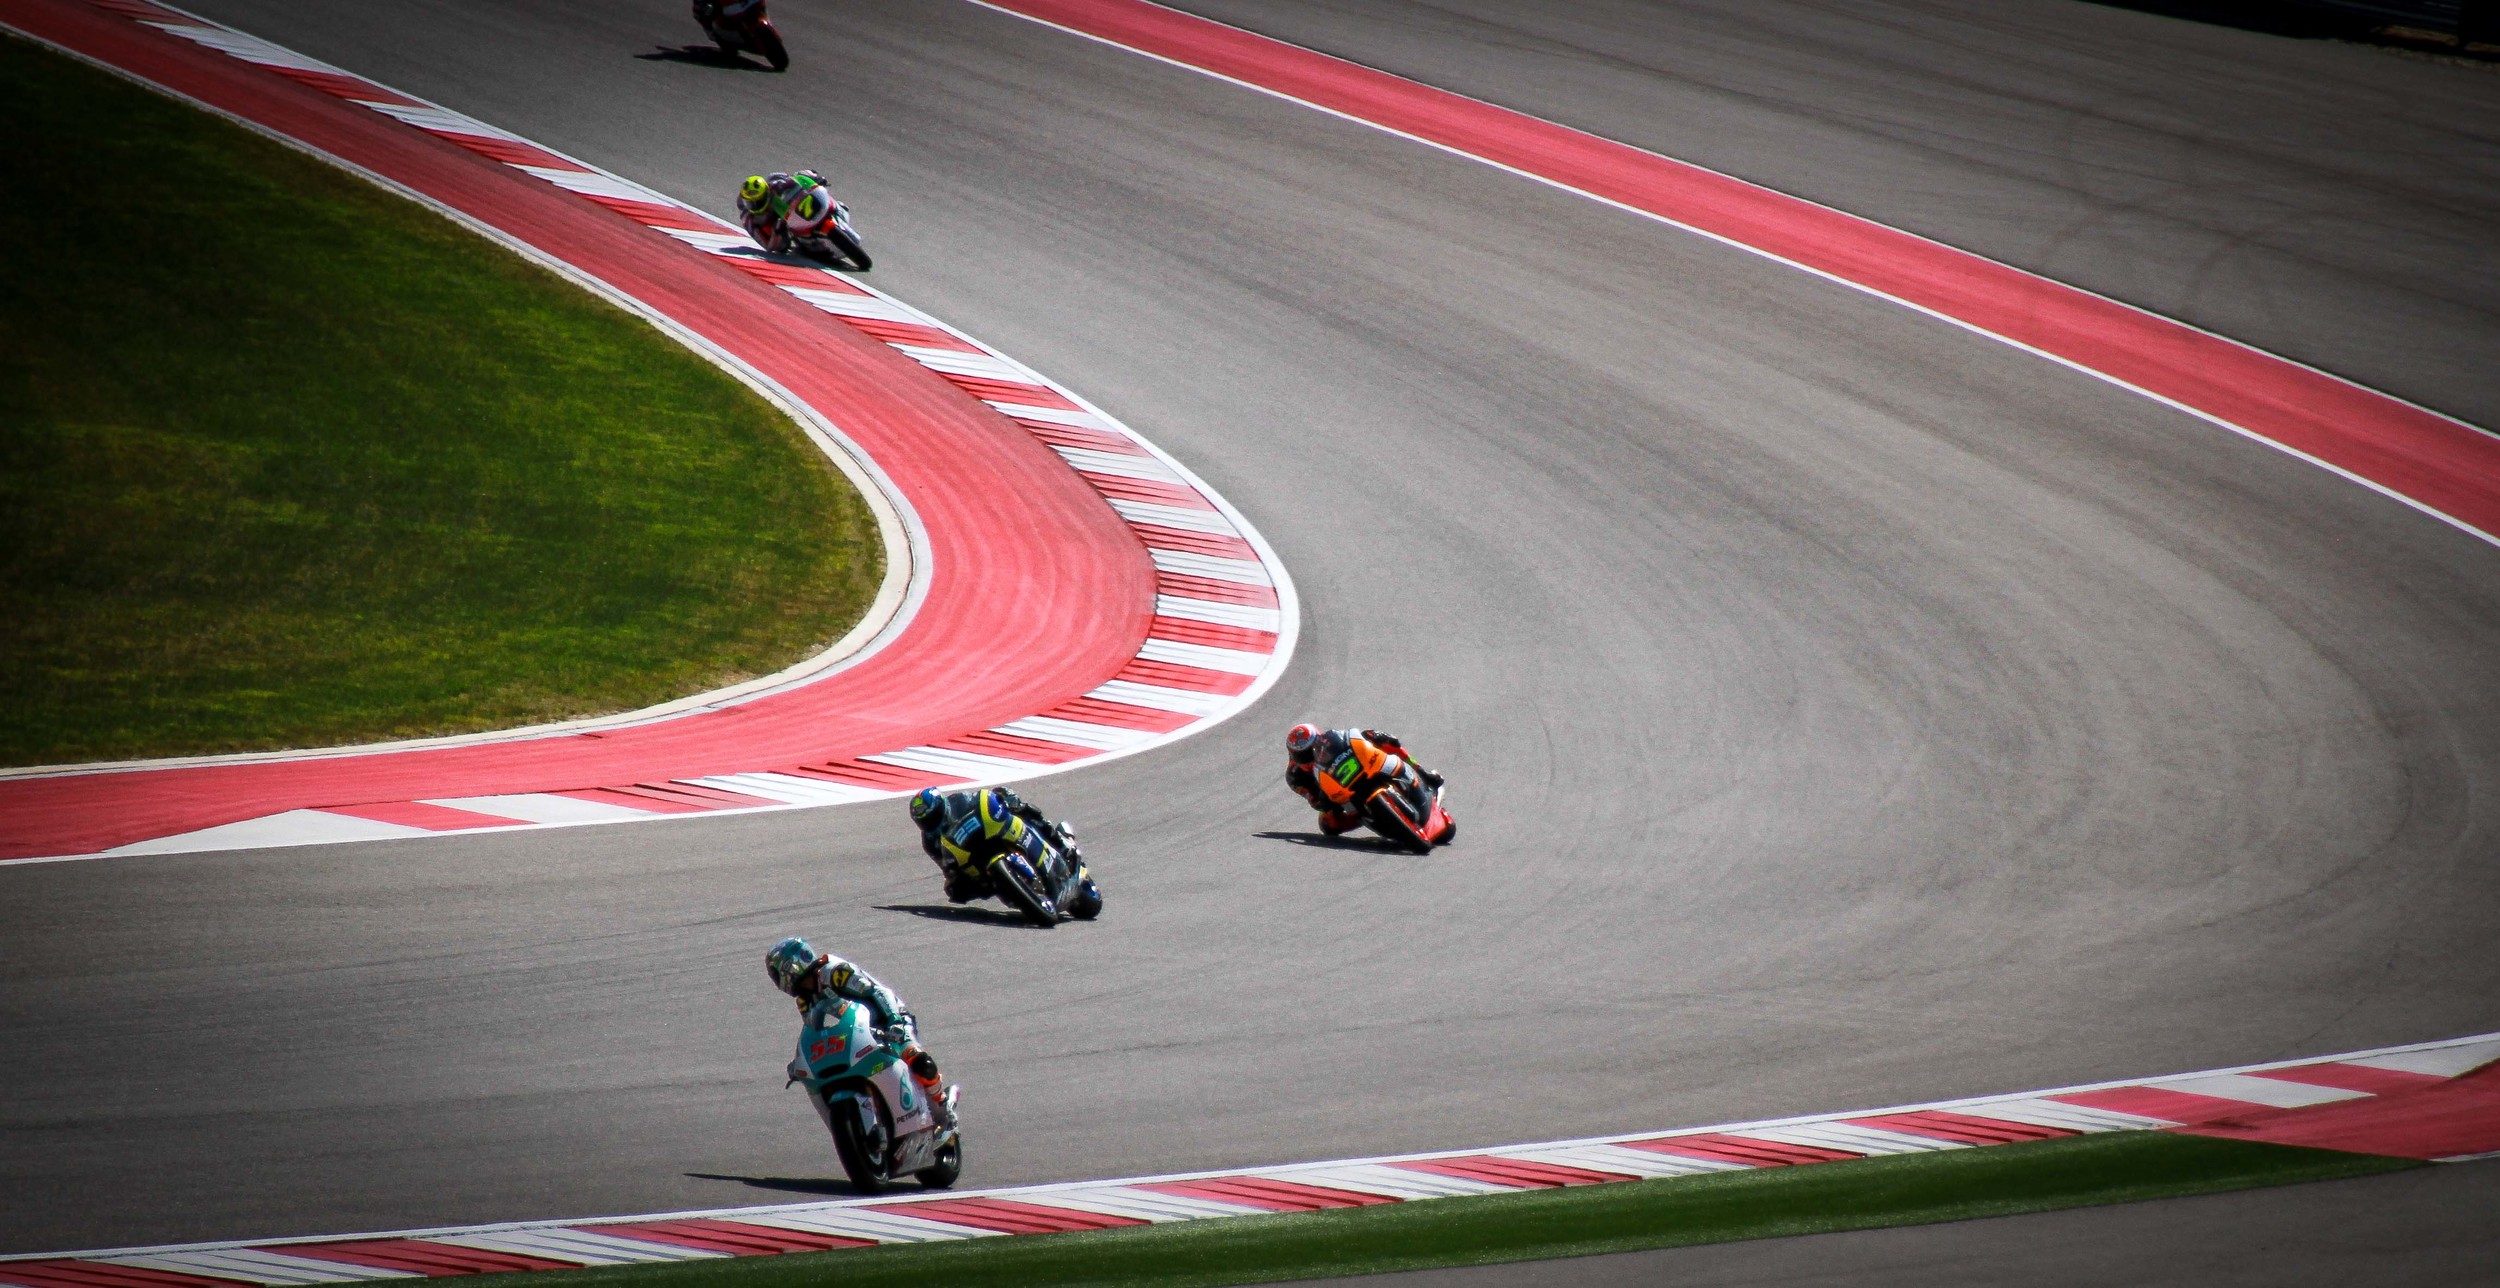  During a practice run, Moto2 rider number 55 looks at the other riders coming out of Turn 2 at the Circuit Of the Americas. 